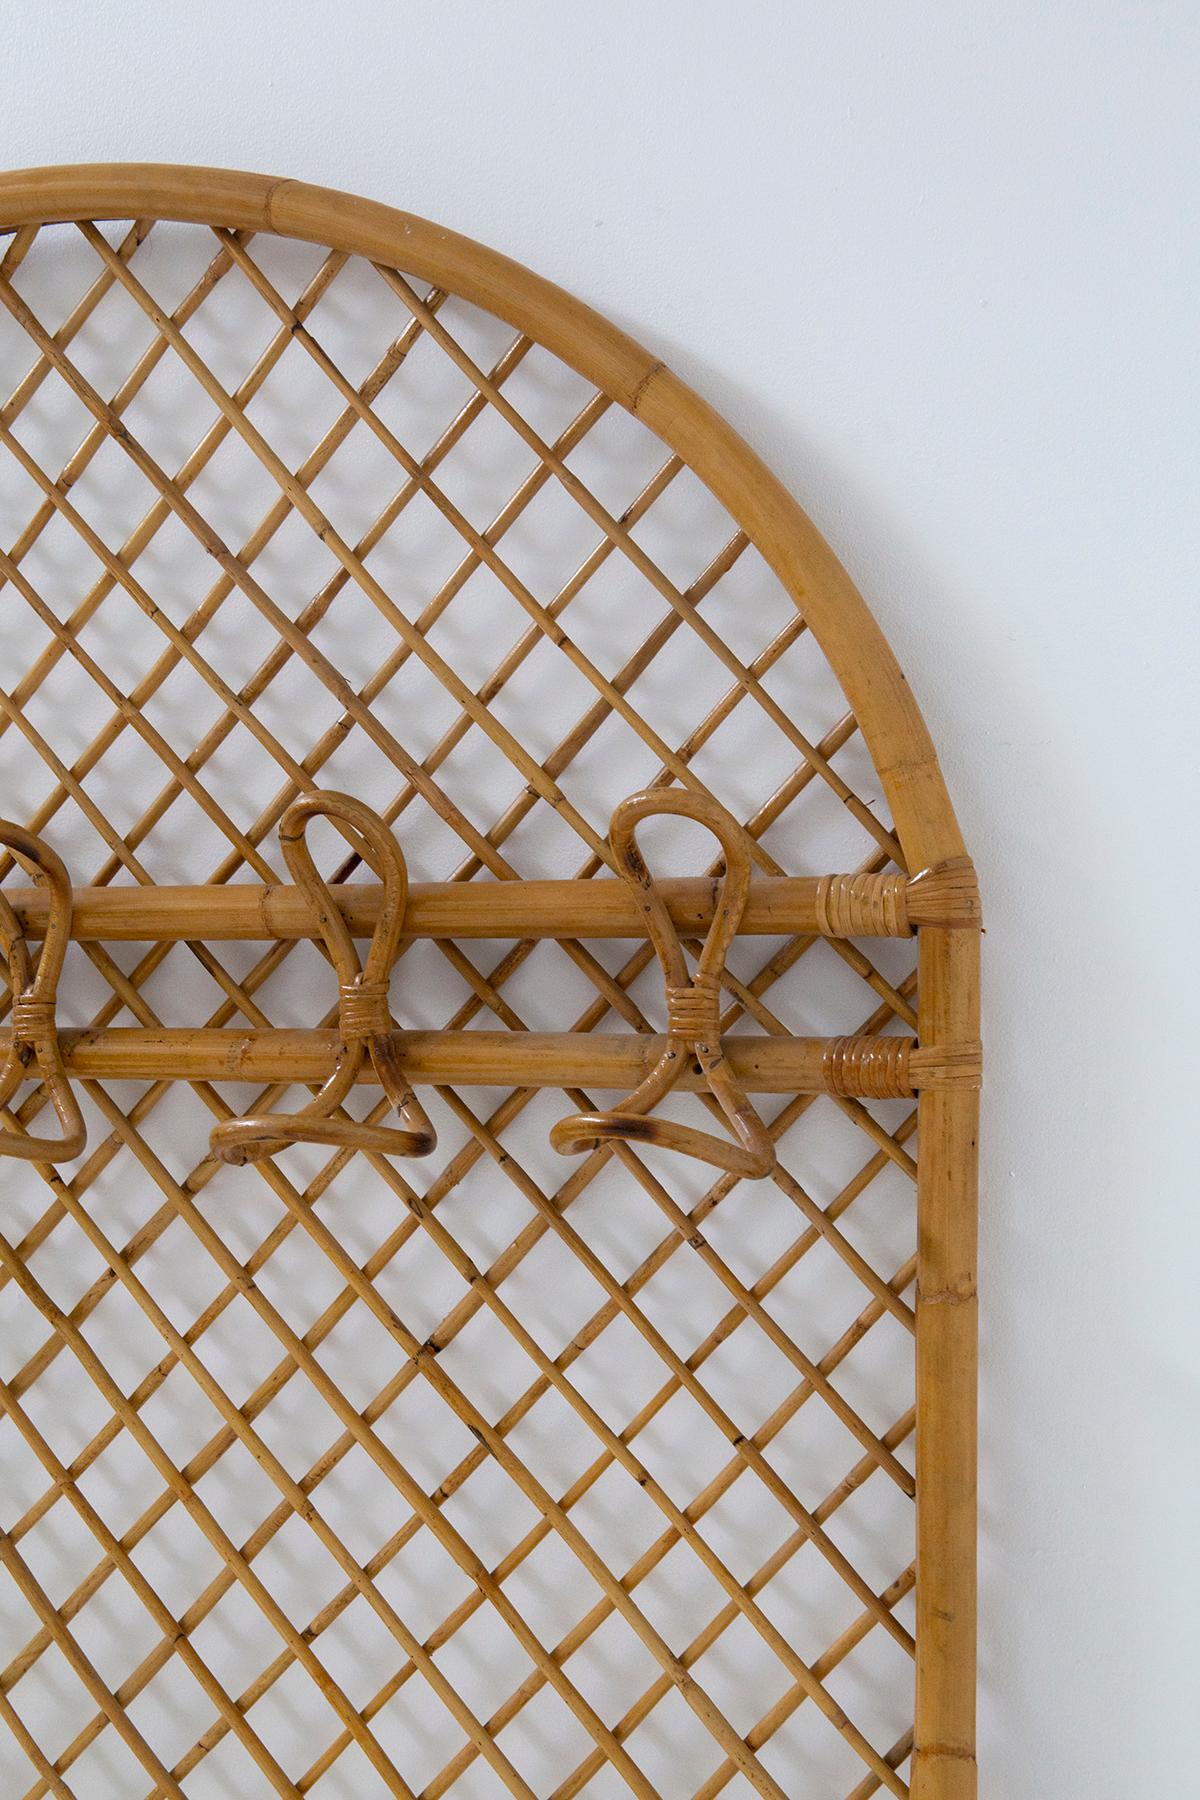 Bamboo Vintage Italian manifacture bamboo and decorative wall hanging For Sale